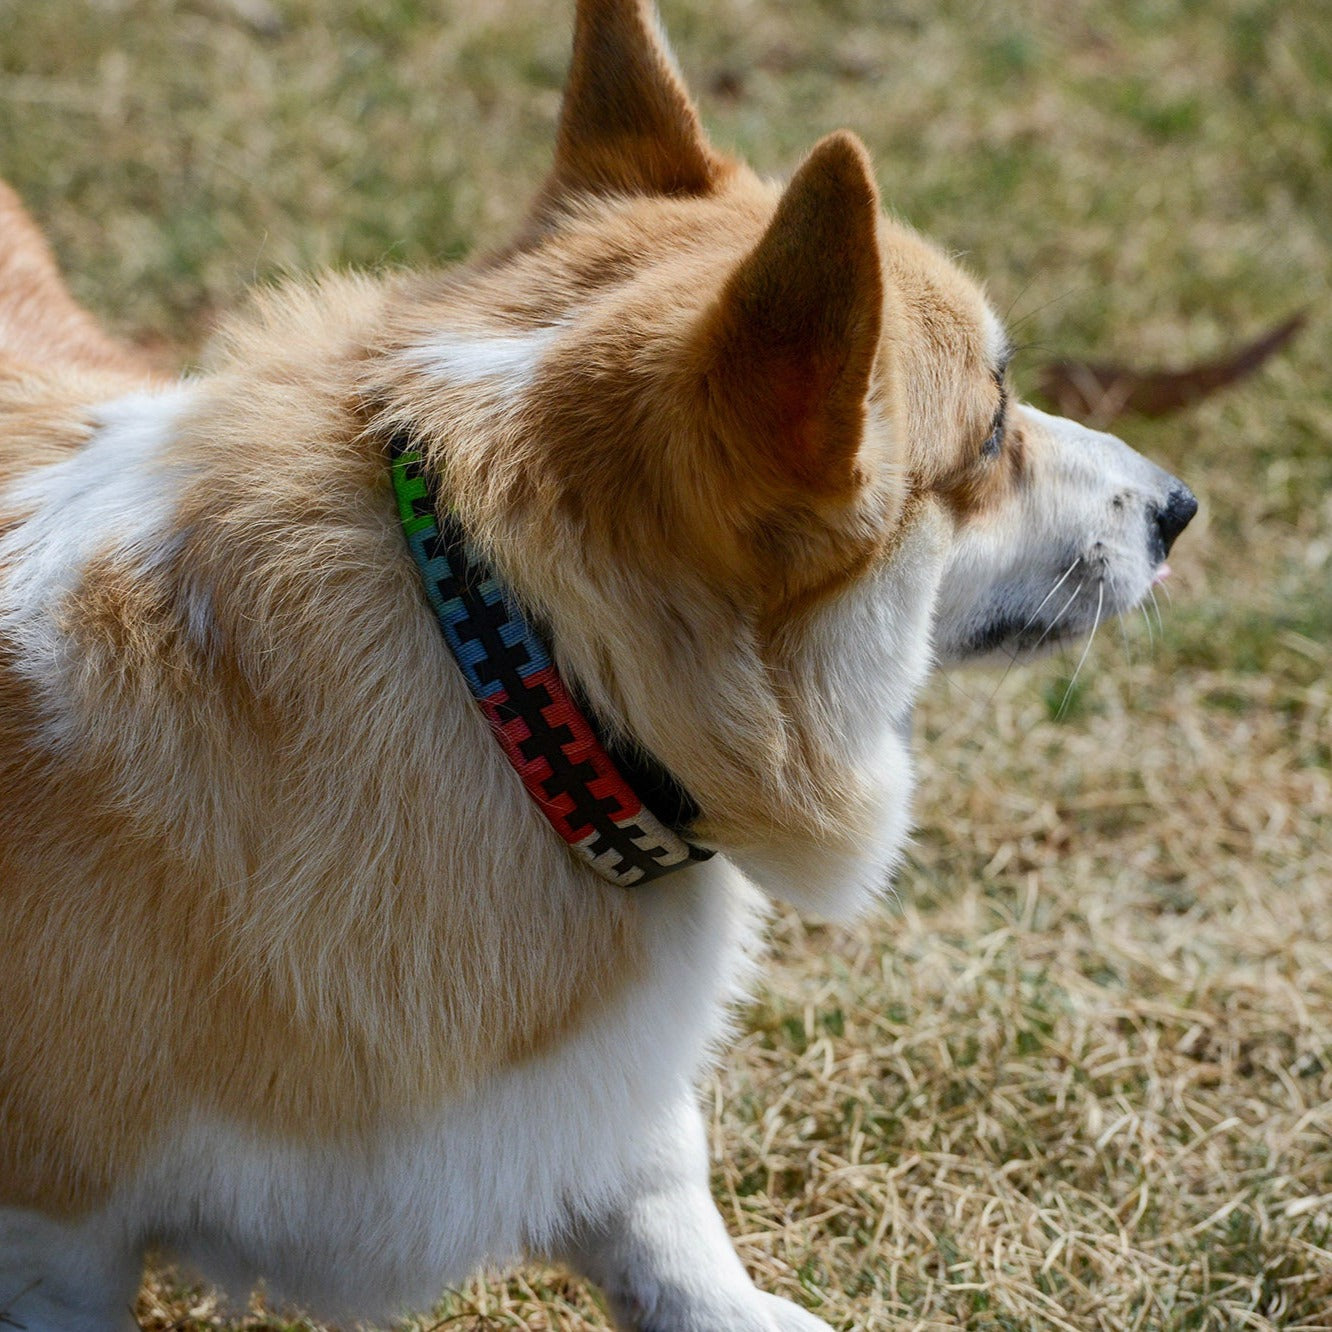 A fluffy pembroke welsh corgi, adorned with a Georgie Paws Polo Collar - Reg, stands attentively in a field of patchy grass, basking in the sunlight.